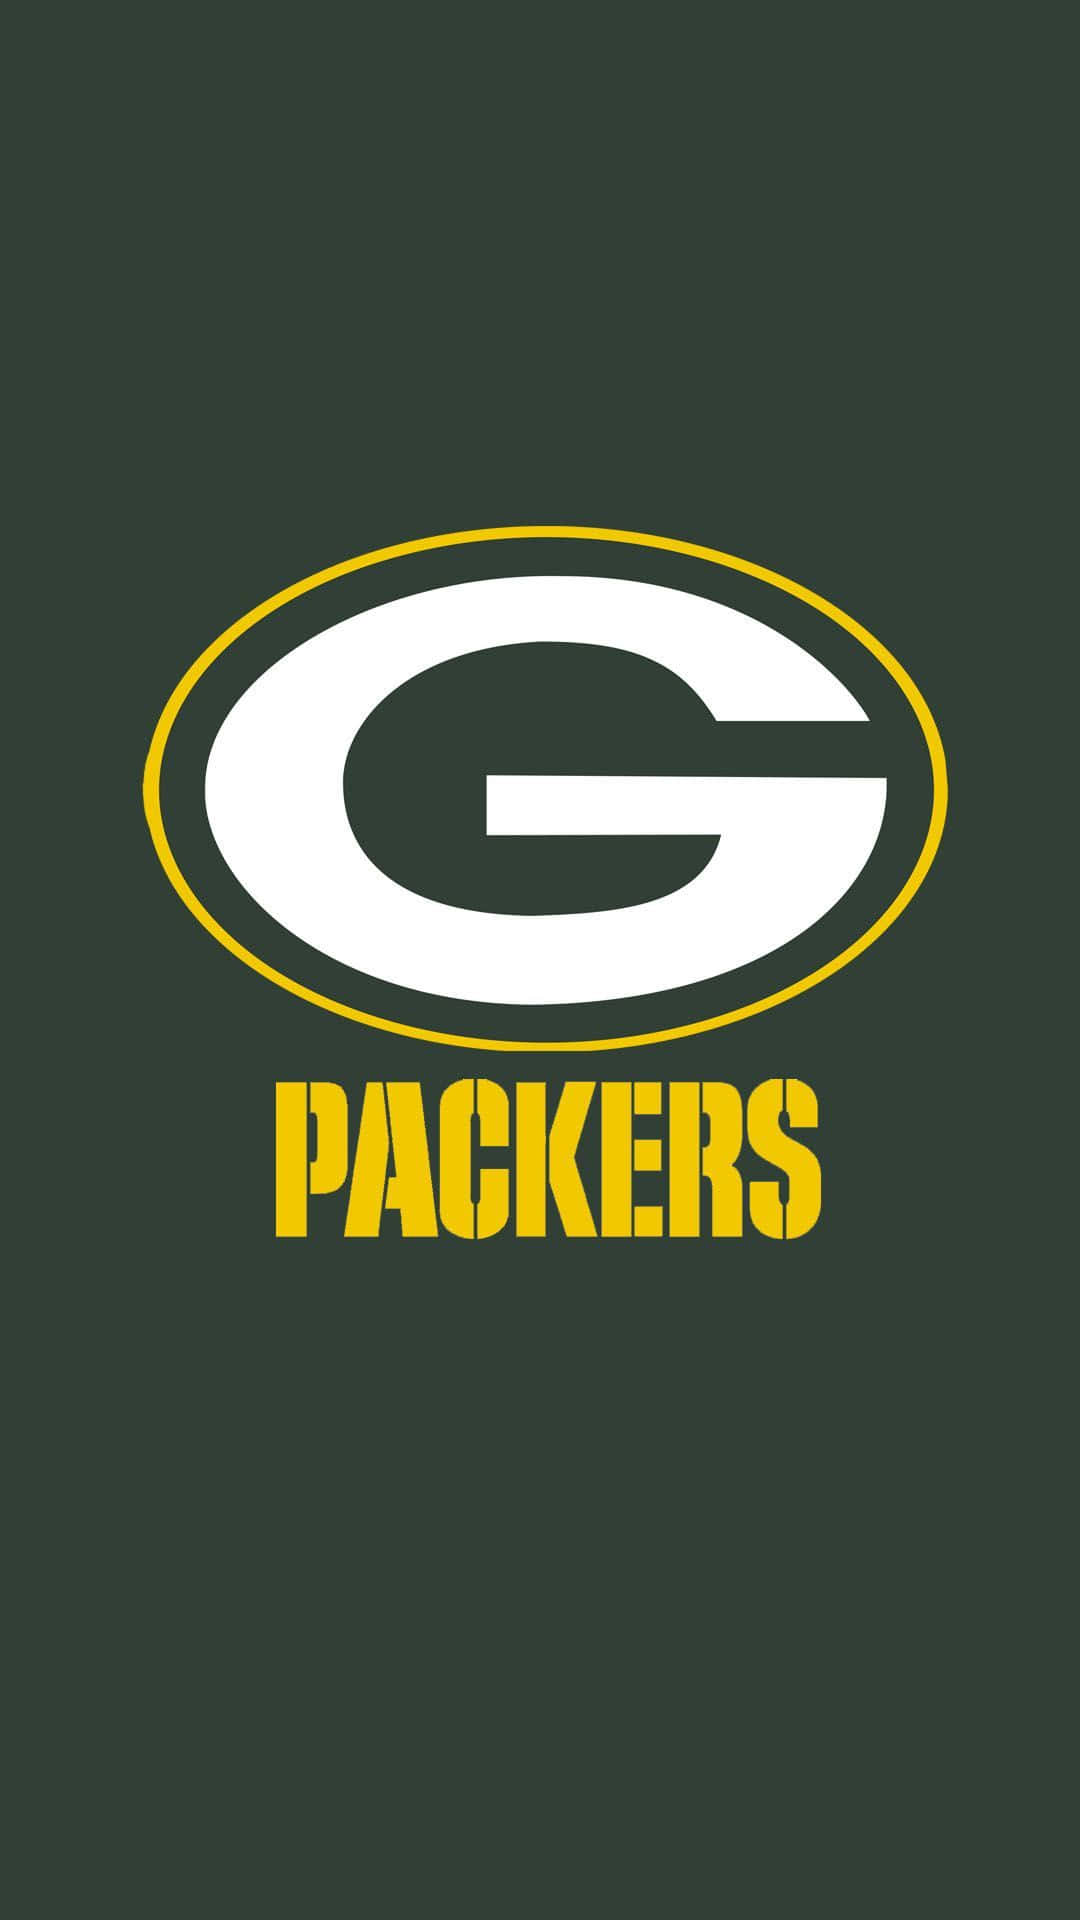 Green Bay Packers Logo on the Field